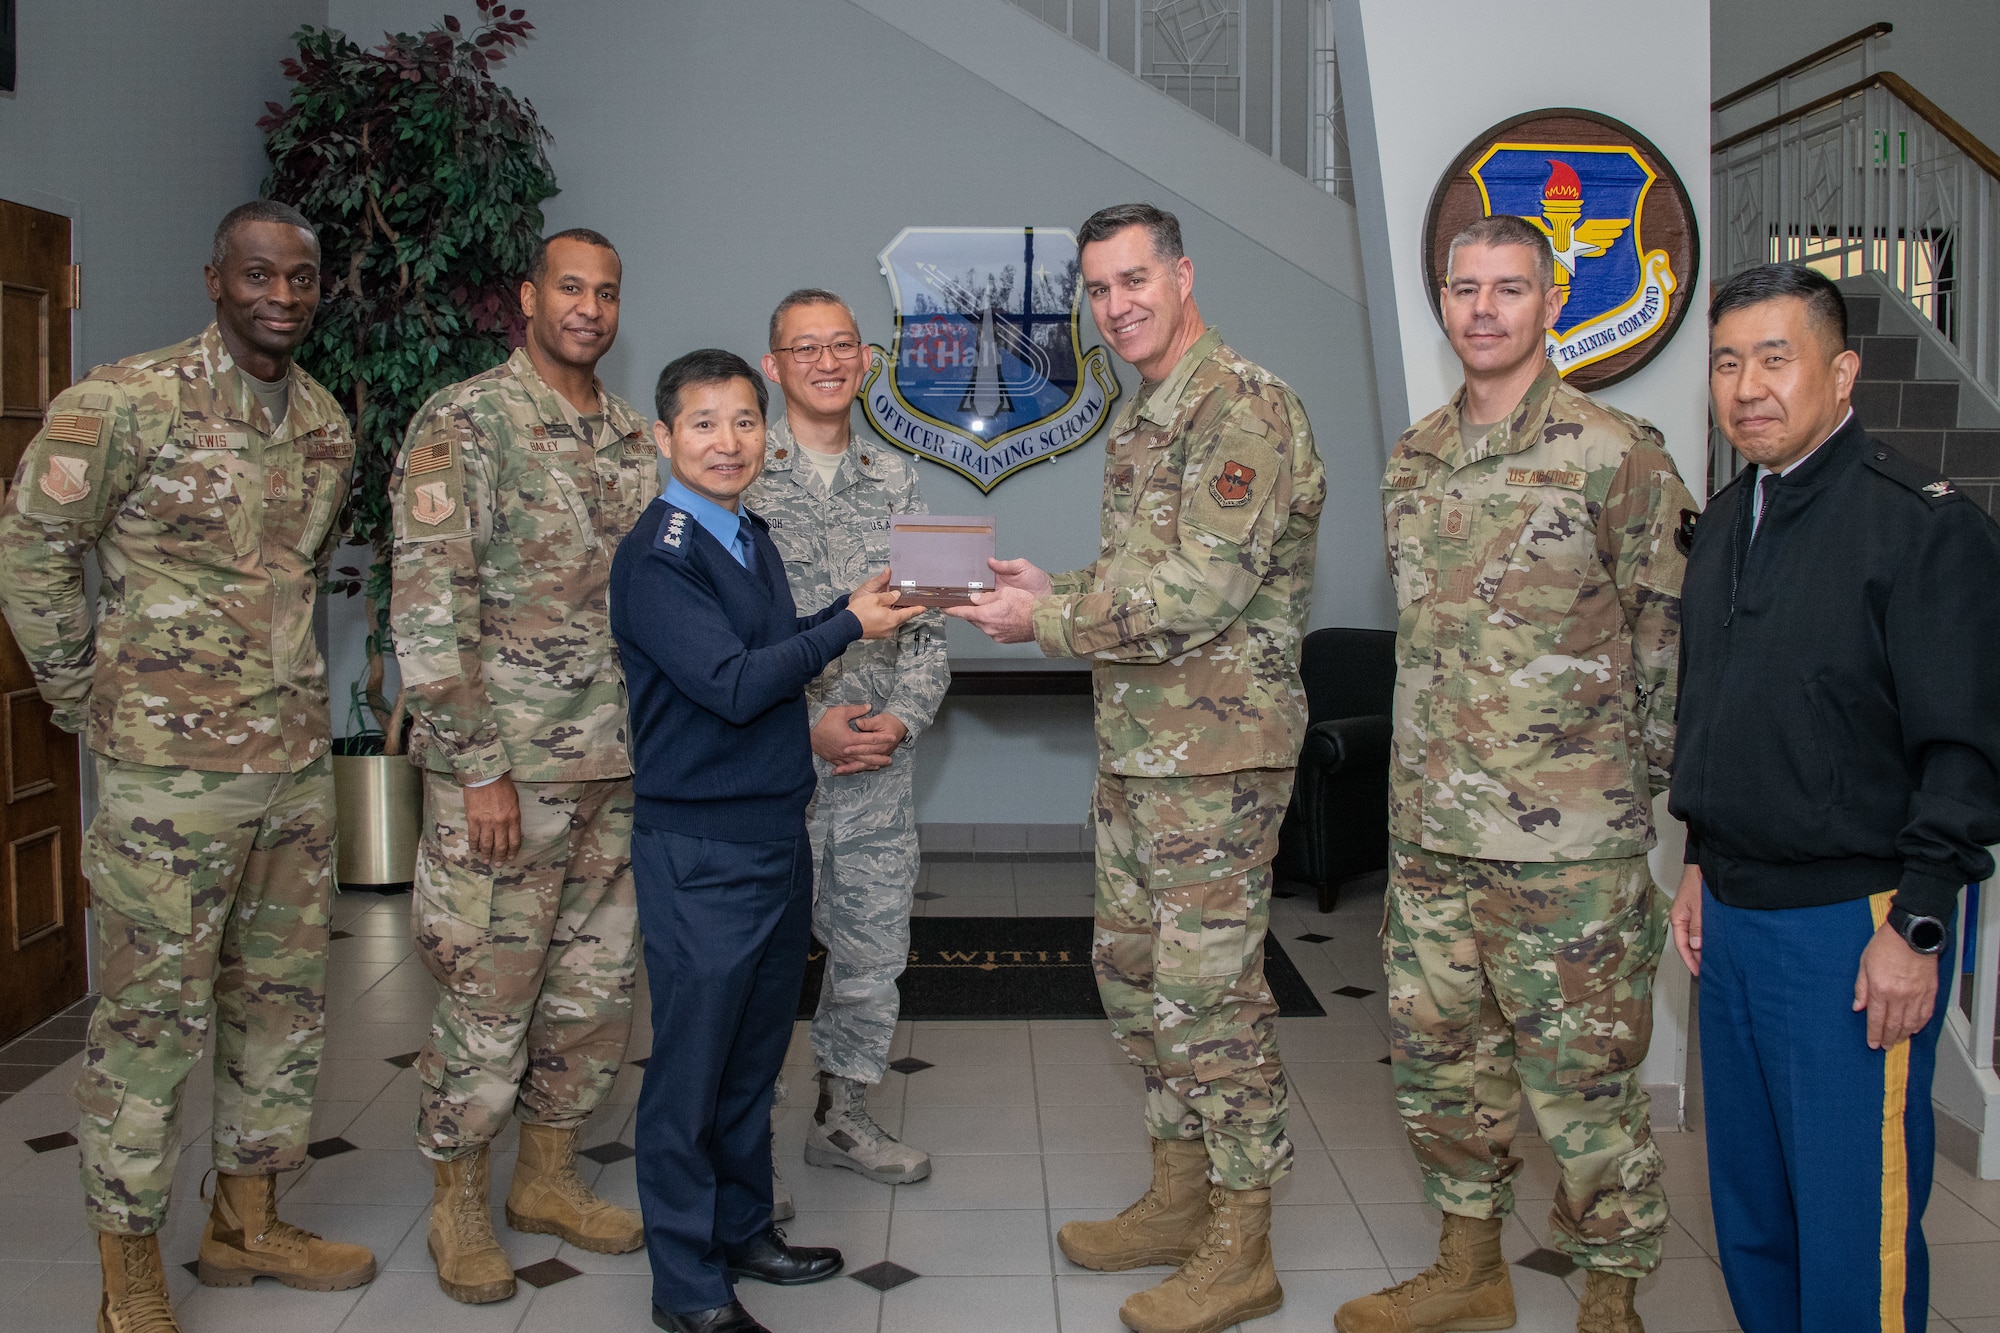 Chaplain, Col. Kwang-Nam Na, Republic of Korea Air Force Chief of Chaplains, and Chaplain, Col. Michael Newton, Air Force Chaplain Corps Chief of Chaplains commandant, extend mutual tokens of appreciation during a visit to Air University Nov. 13-15, 2019, at Maxwell, Air Force Base, Alabama. The visit, as a whole, was held to signify their commitment to strengthening national and functional alliances in support of the Secretary of the Air Force’s priorities. Also included in the photo are (left to right) Chief Master Sgt. Gabriel Lewis, Officer Training School superintendent, Col. Peter Bailey, OTS commandant, Chaplain, Maj. Shin Soh, ROKAF translator, Chief Master Sgt. Michael Taylor, AFCCC chief, Chaplain, Col. Samuel Lee, United Nations Command, Combined Forces Command and United States Forces Korea Command Chaplain.